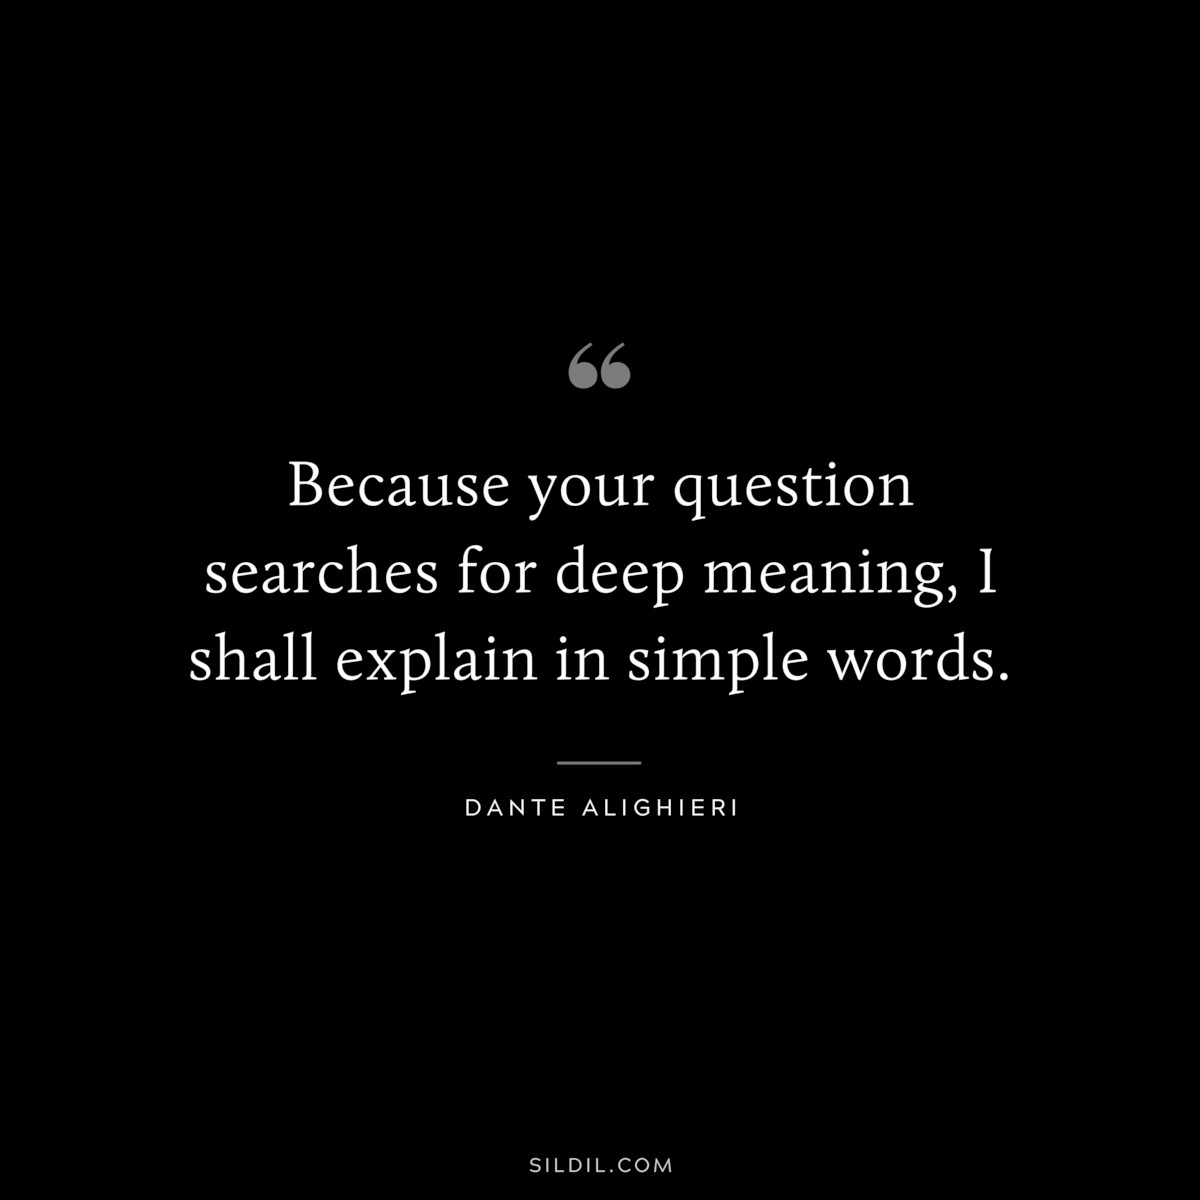 Because your question searches for deep meaning, I shall explain in simple words. ― Dante Alighieri